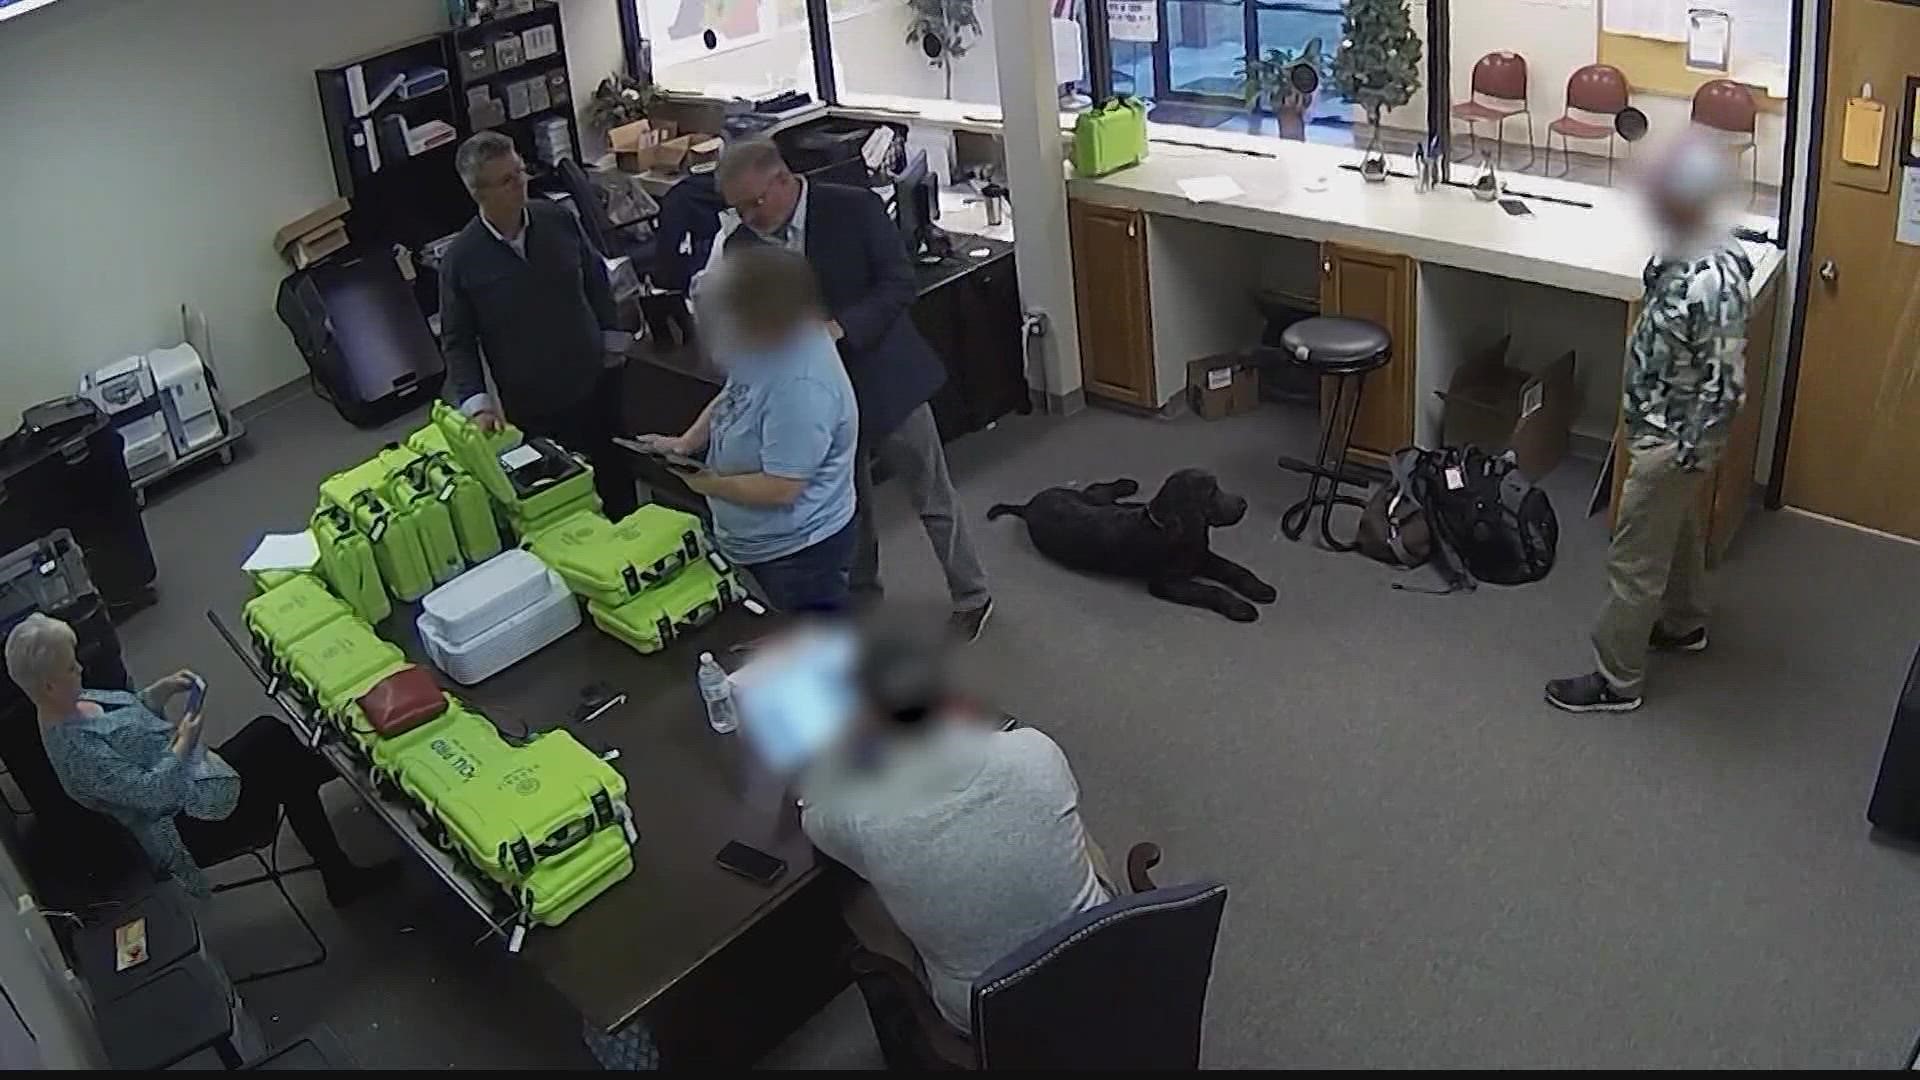 New surveillance video released from a south Georgia election office shows what's described as a security breach in progress.